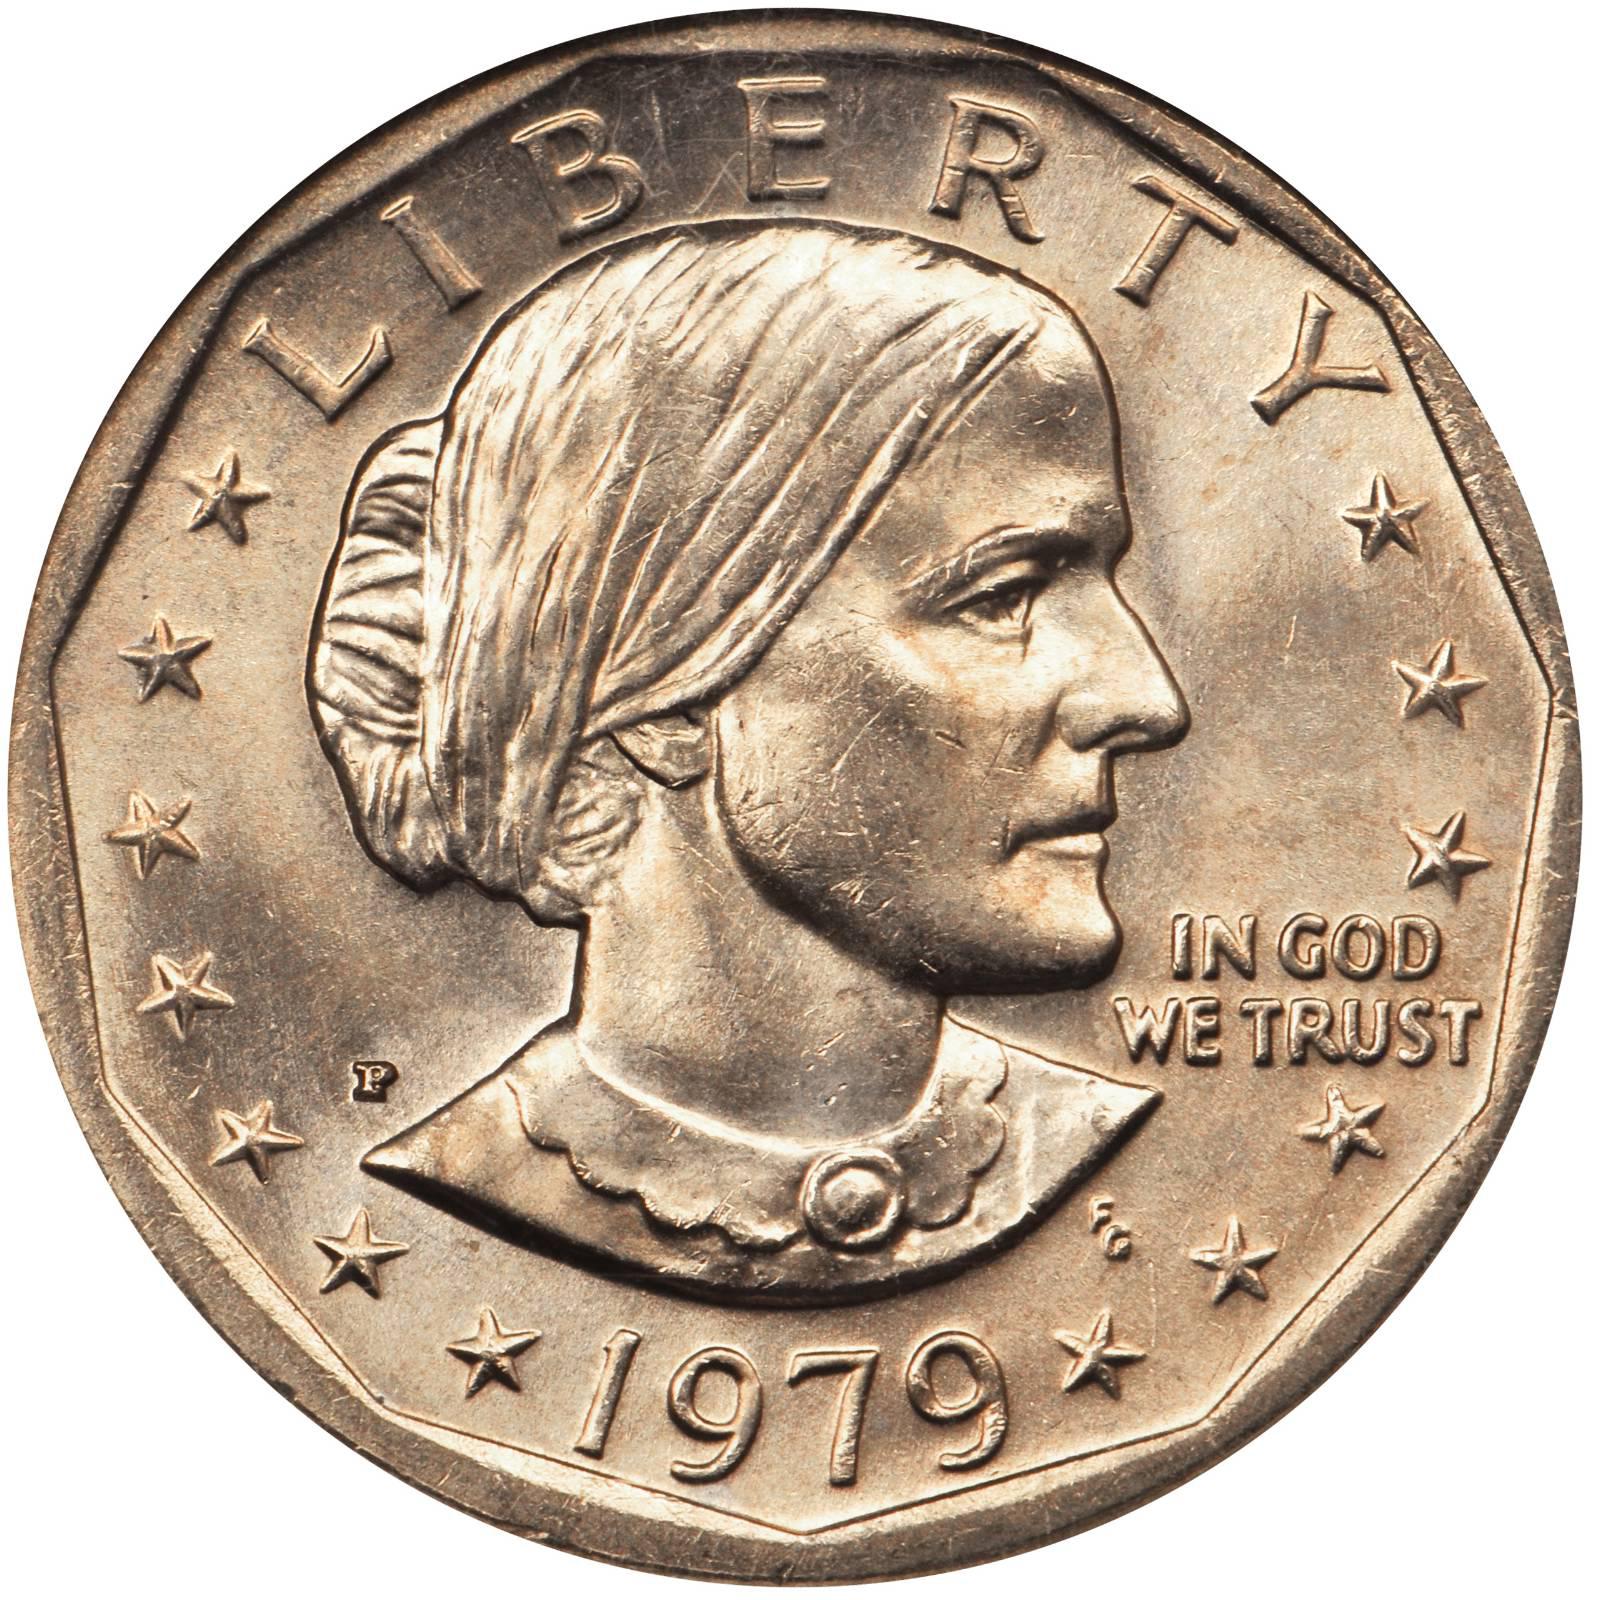 Susan b anthony coin mint mark location